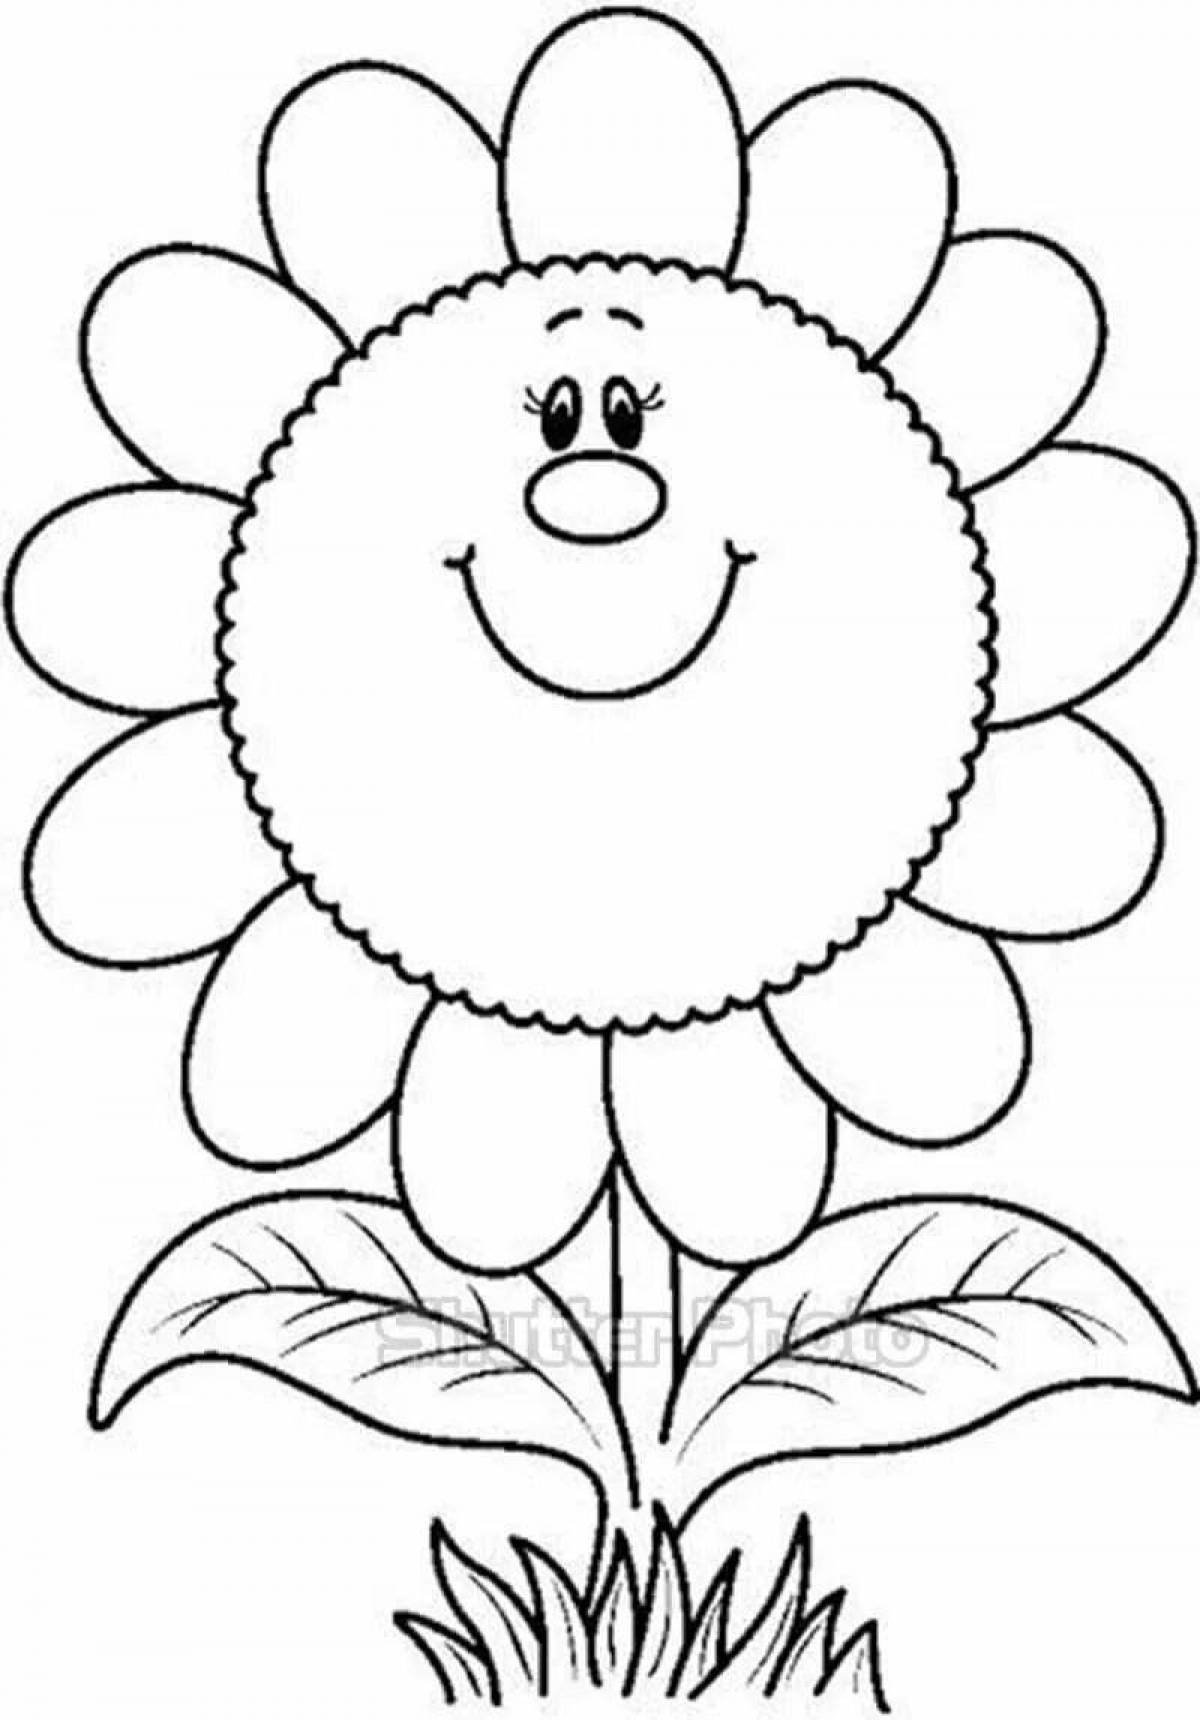 Calm coloring flower for children 5-6 years old